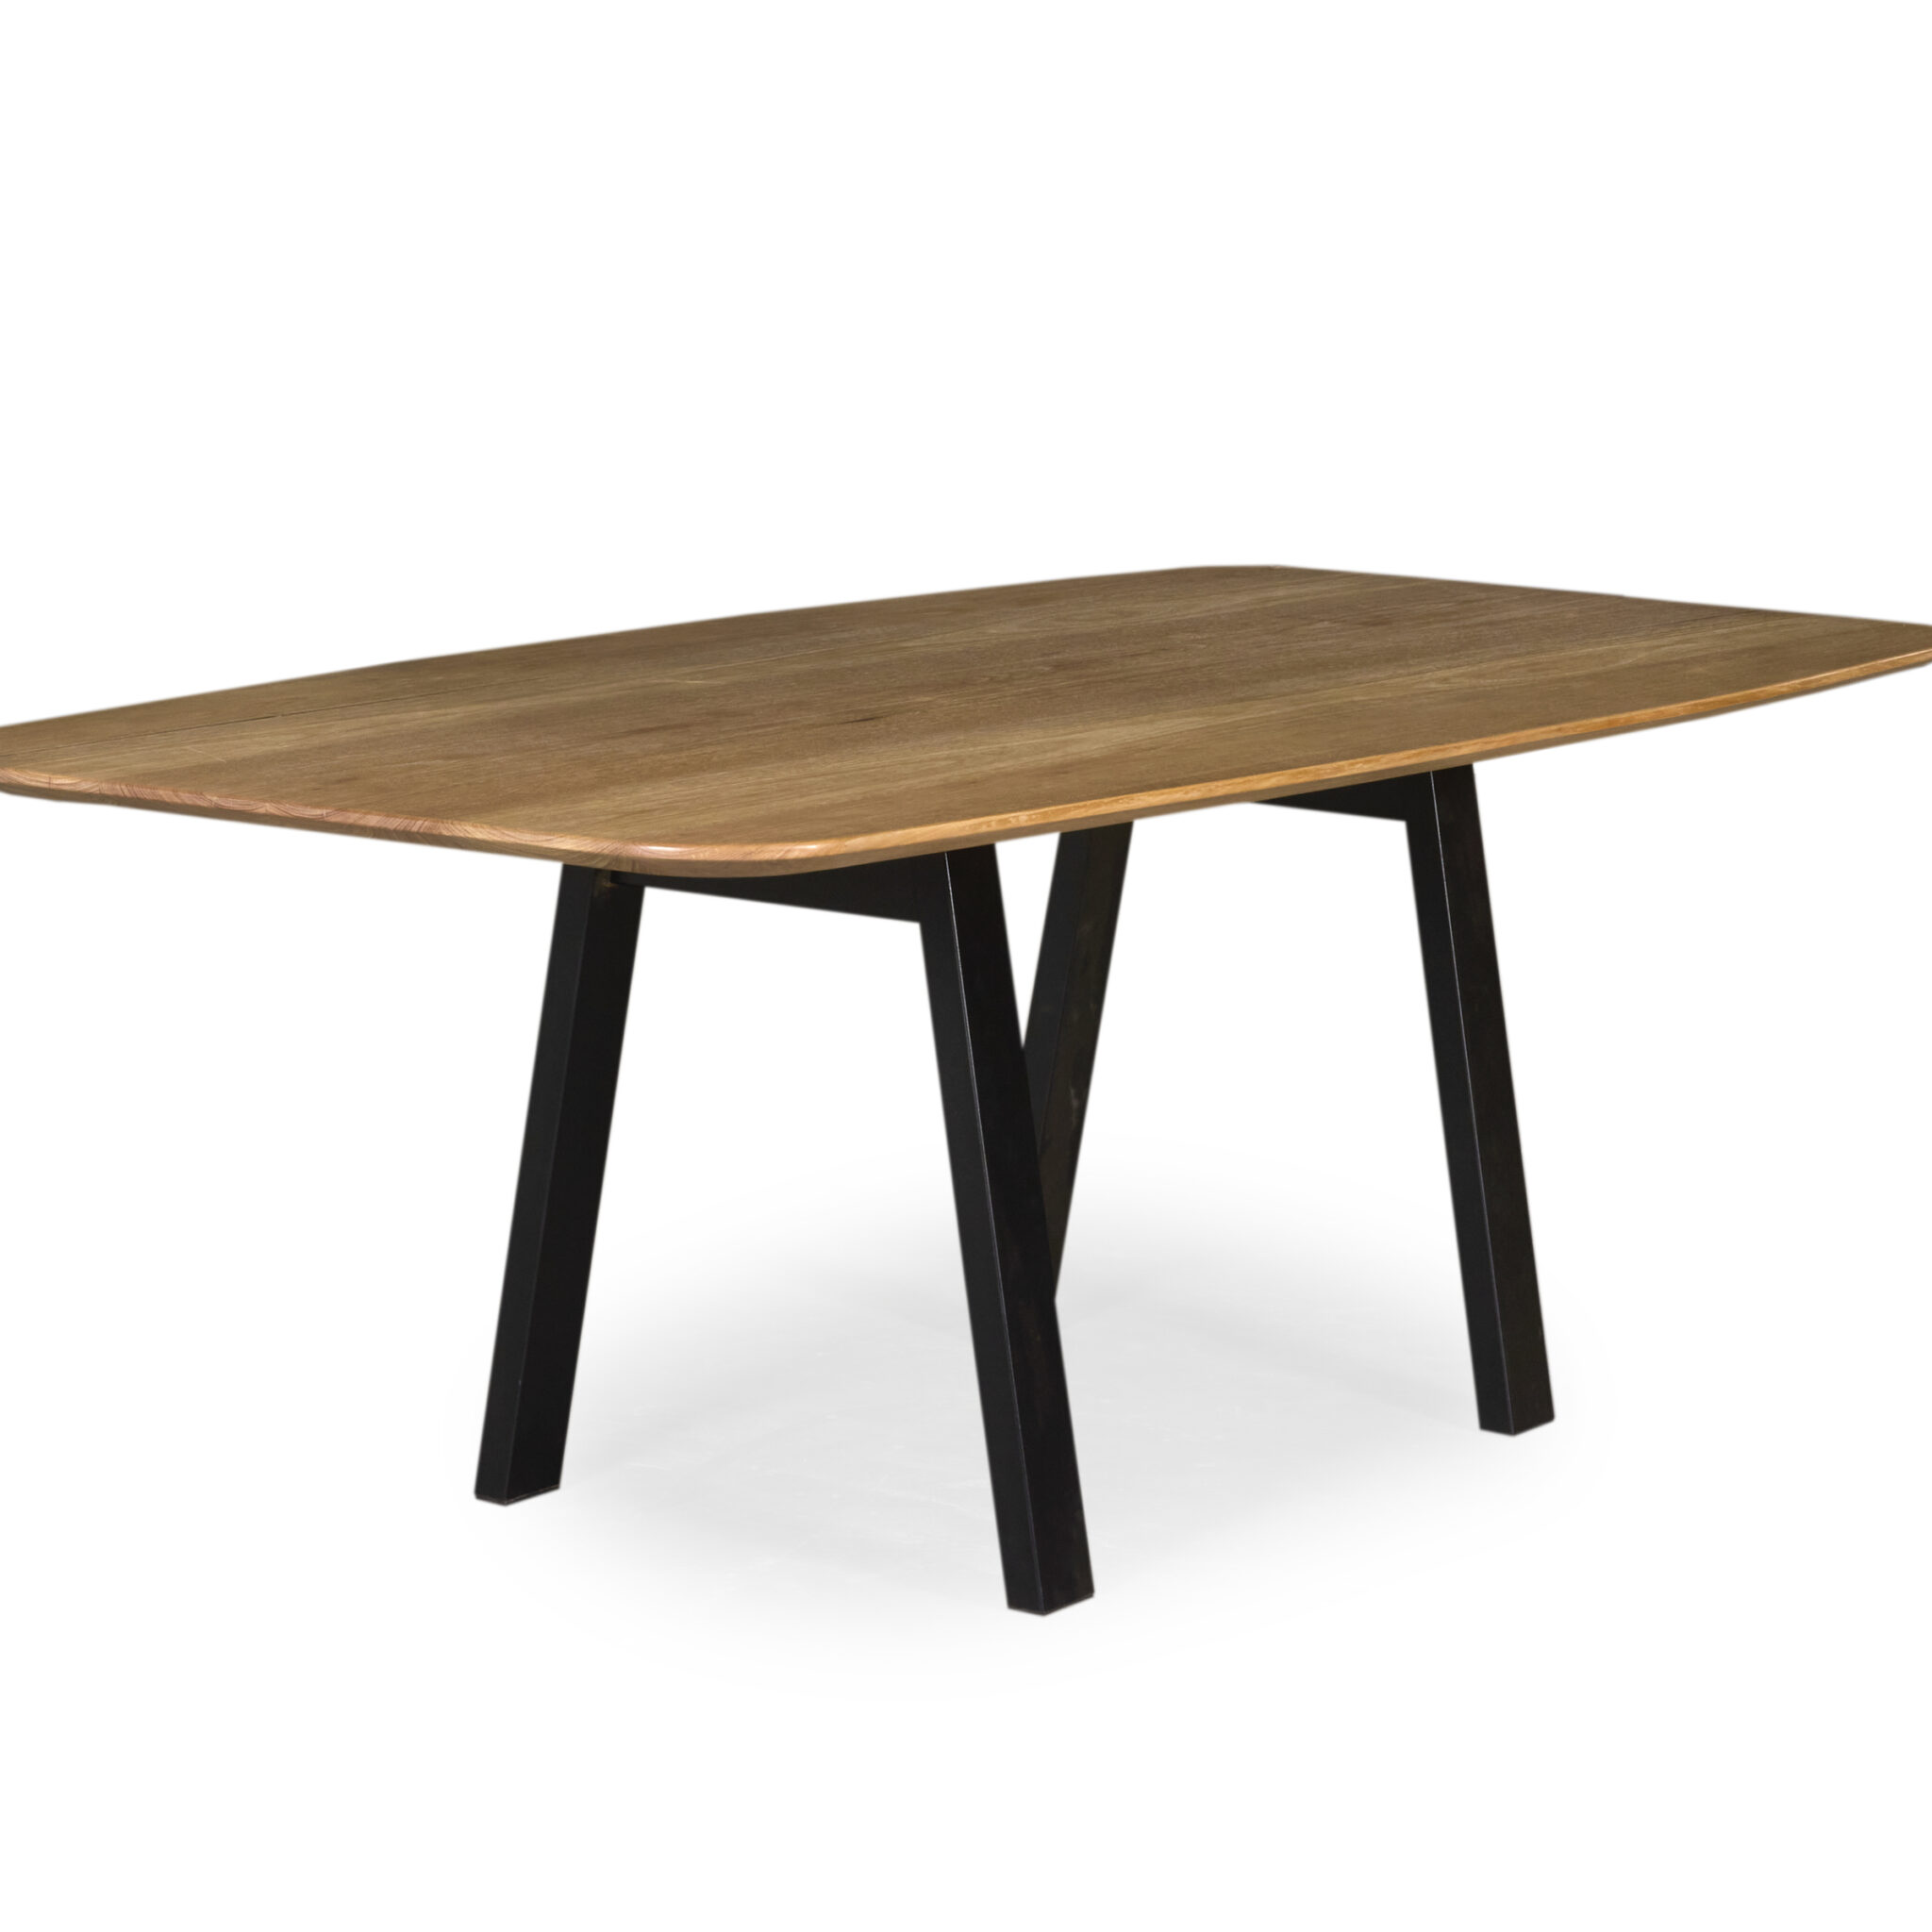 Balwyn Dining Table Crafted from Victorian Ash timber with Kooyong Black Steel base